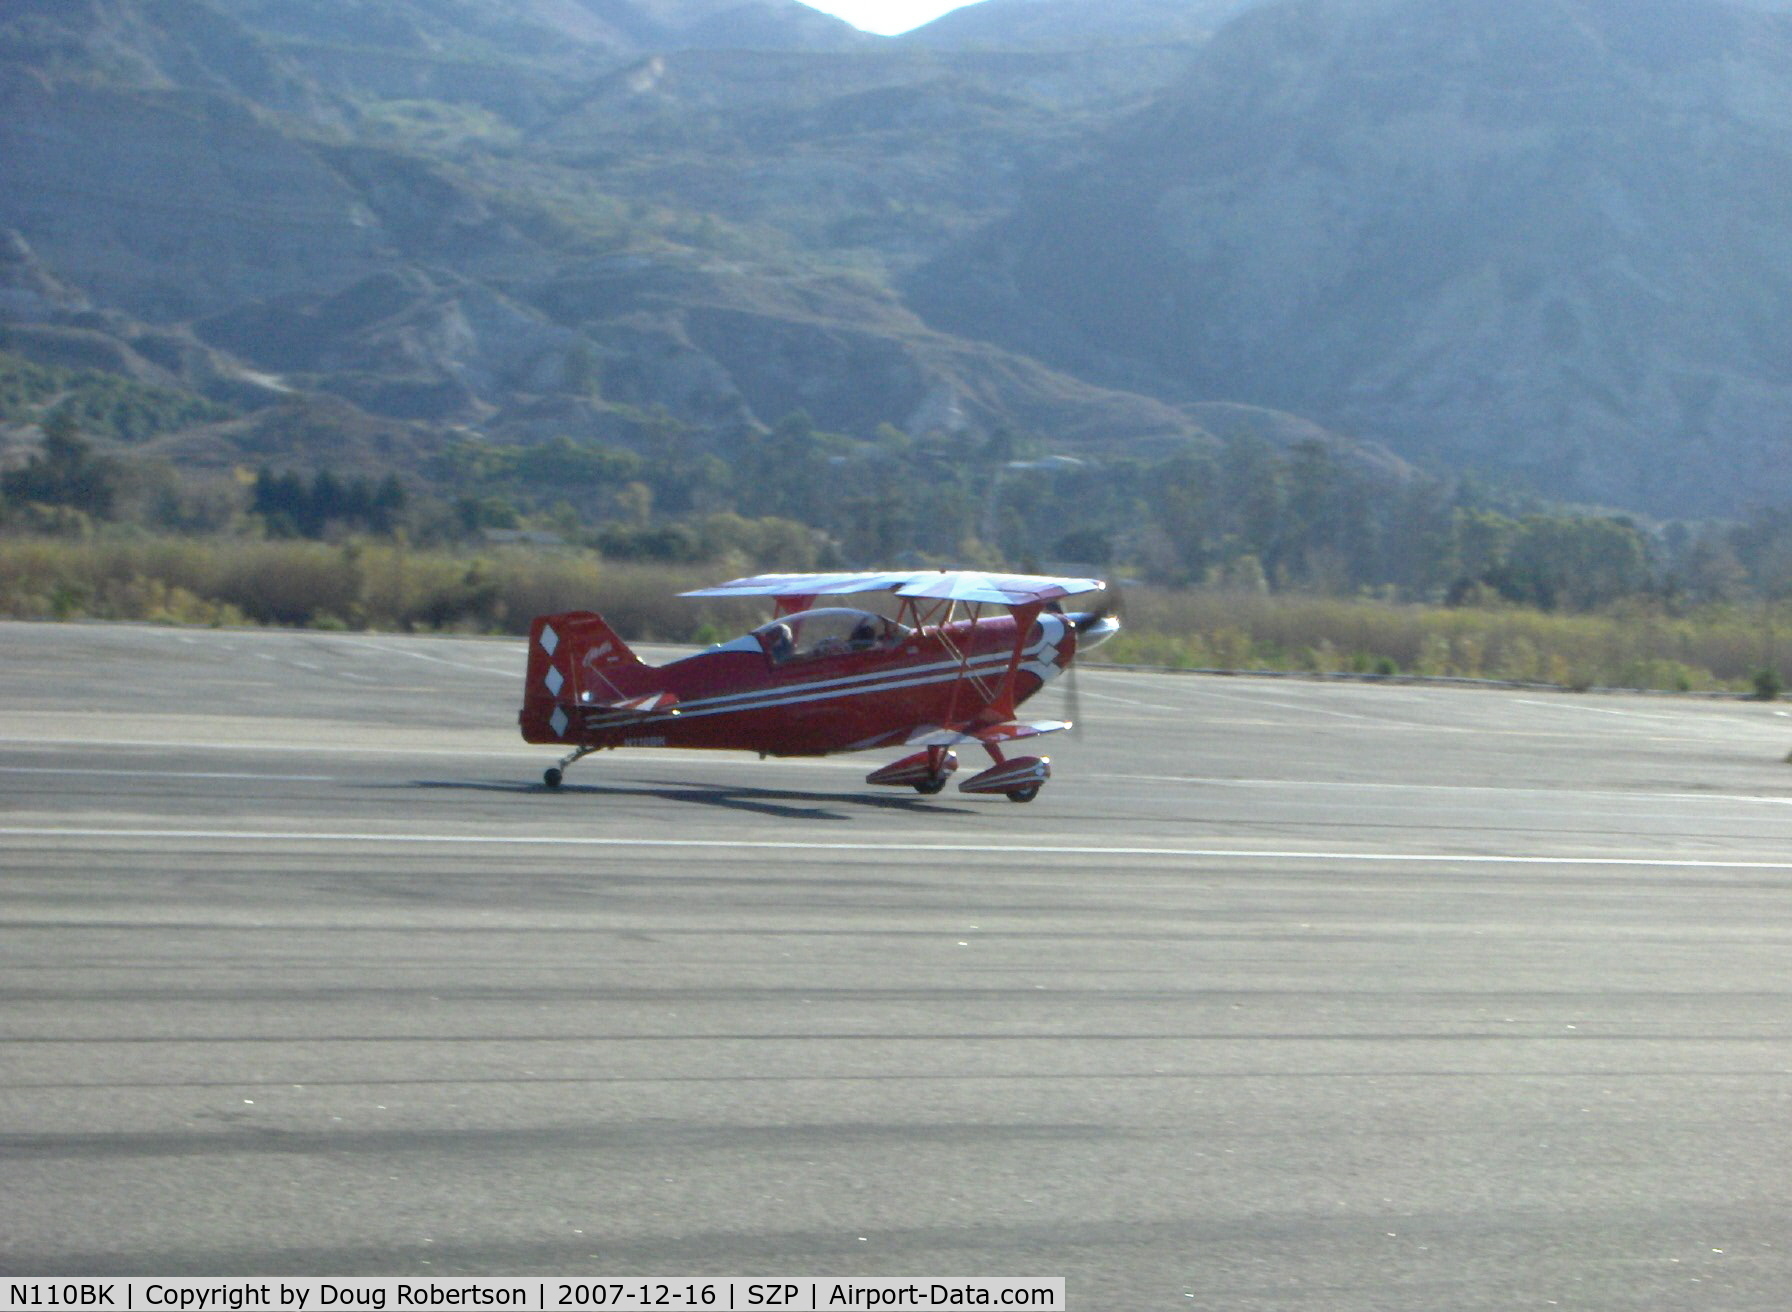 N110BK, 2007 Aviat Pitts S-2C Special C/N 6077, 2007 Aviat PITTS S-2C, Lycoming AEIO-540-D4A5 260 Hp, landing Rwy 22